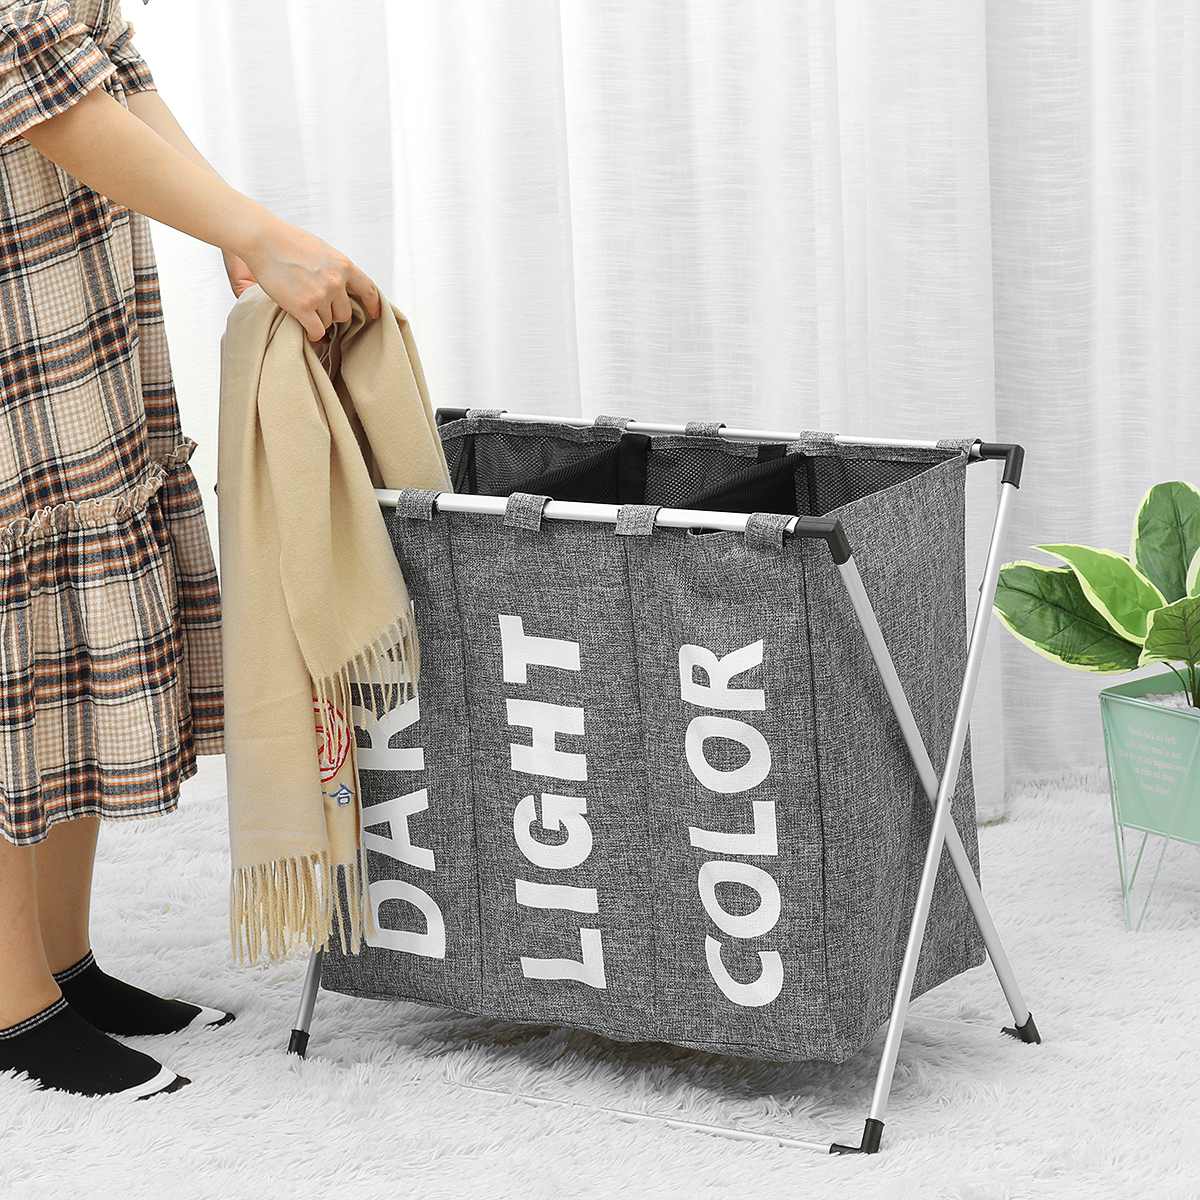 Foldable-Laundry-Basket-Folding-Dirty-Clothes-Bag-Washing-Bin-Home-Clothes-Organizer-with-Handle-1785430-14